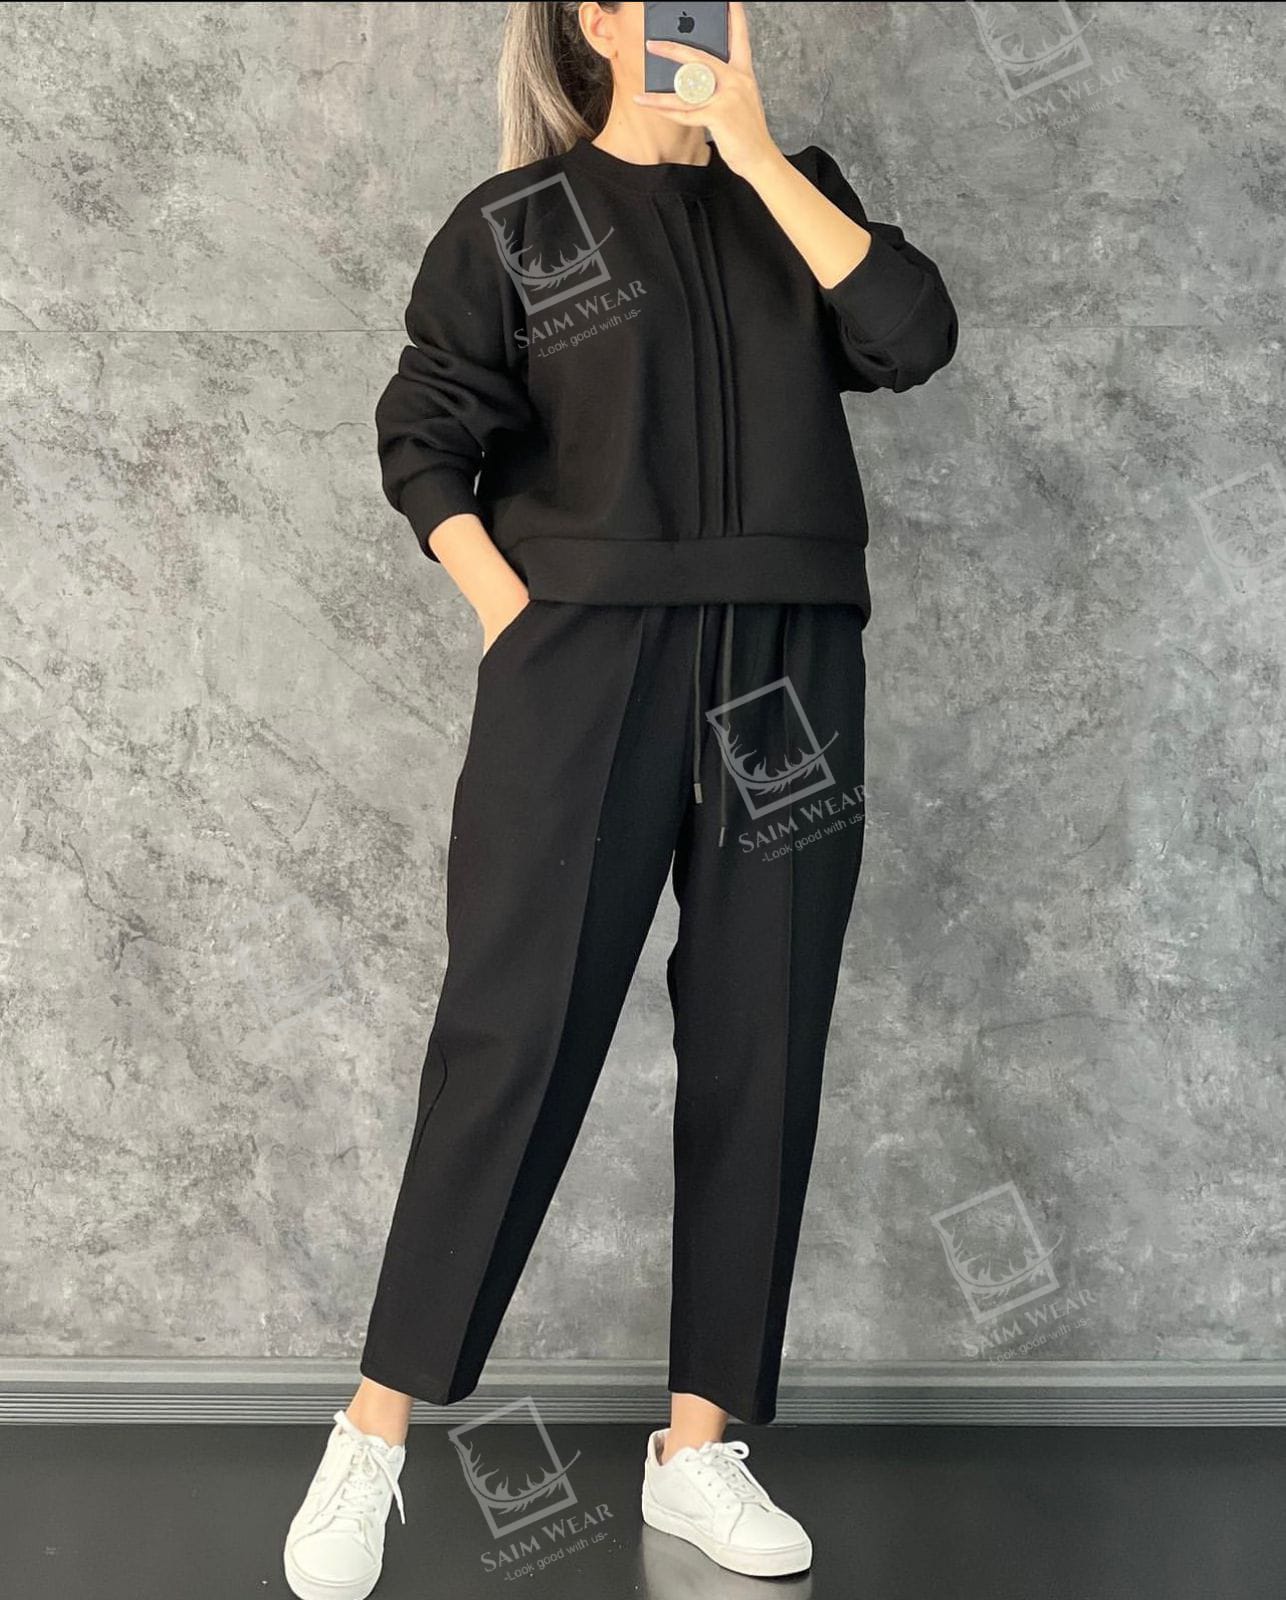 Ladies Lounge Wear Hooded 2 Piece Co Ord Jogging Bottoms Womens Tracksuit  Set